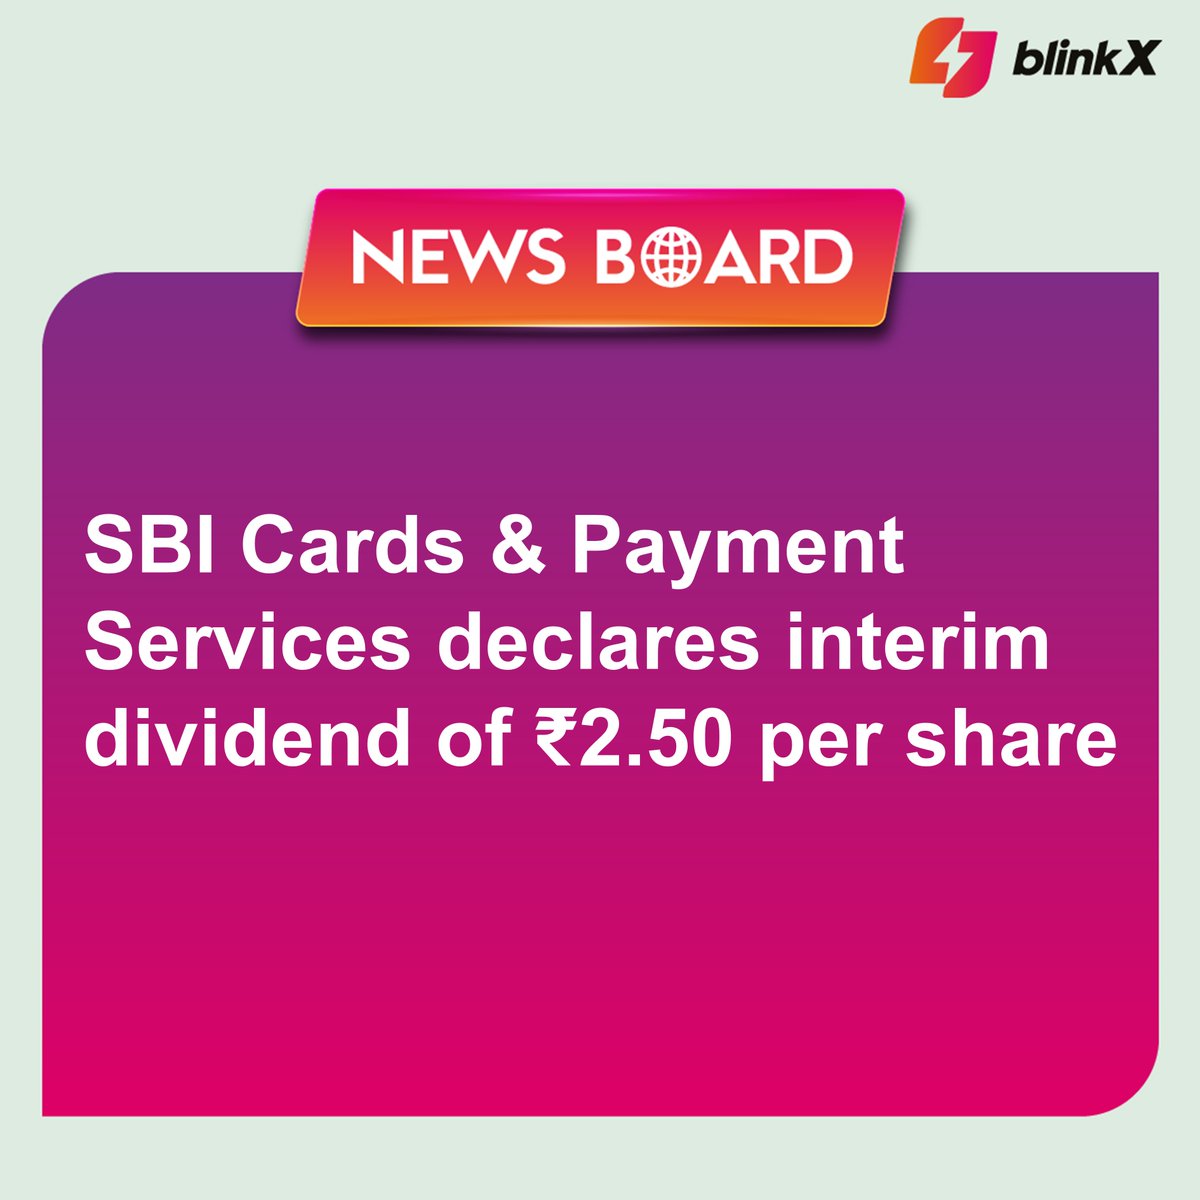 The Record Date for the purpose of determining the entitlement of payment of Interim Dividend is Thursday, March 28, 2024, the company said.

#SBI #SBICard #sbicards #dividend #interimdividend #finance #loan #bank #stocks #stockinfocus #recorddate #stock #bseindia #nseindia…